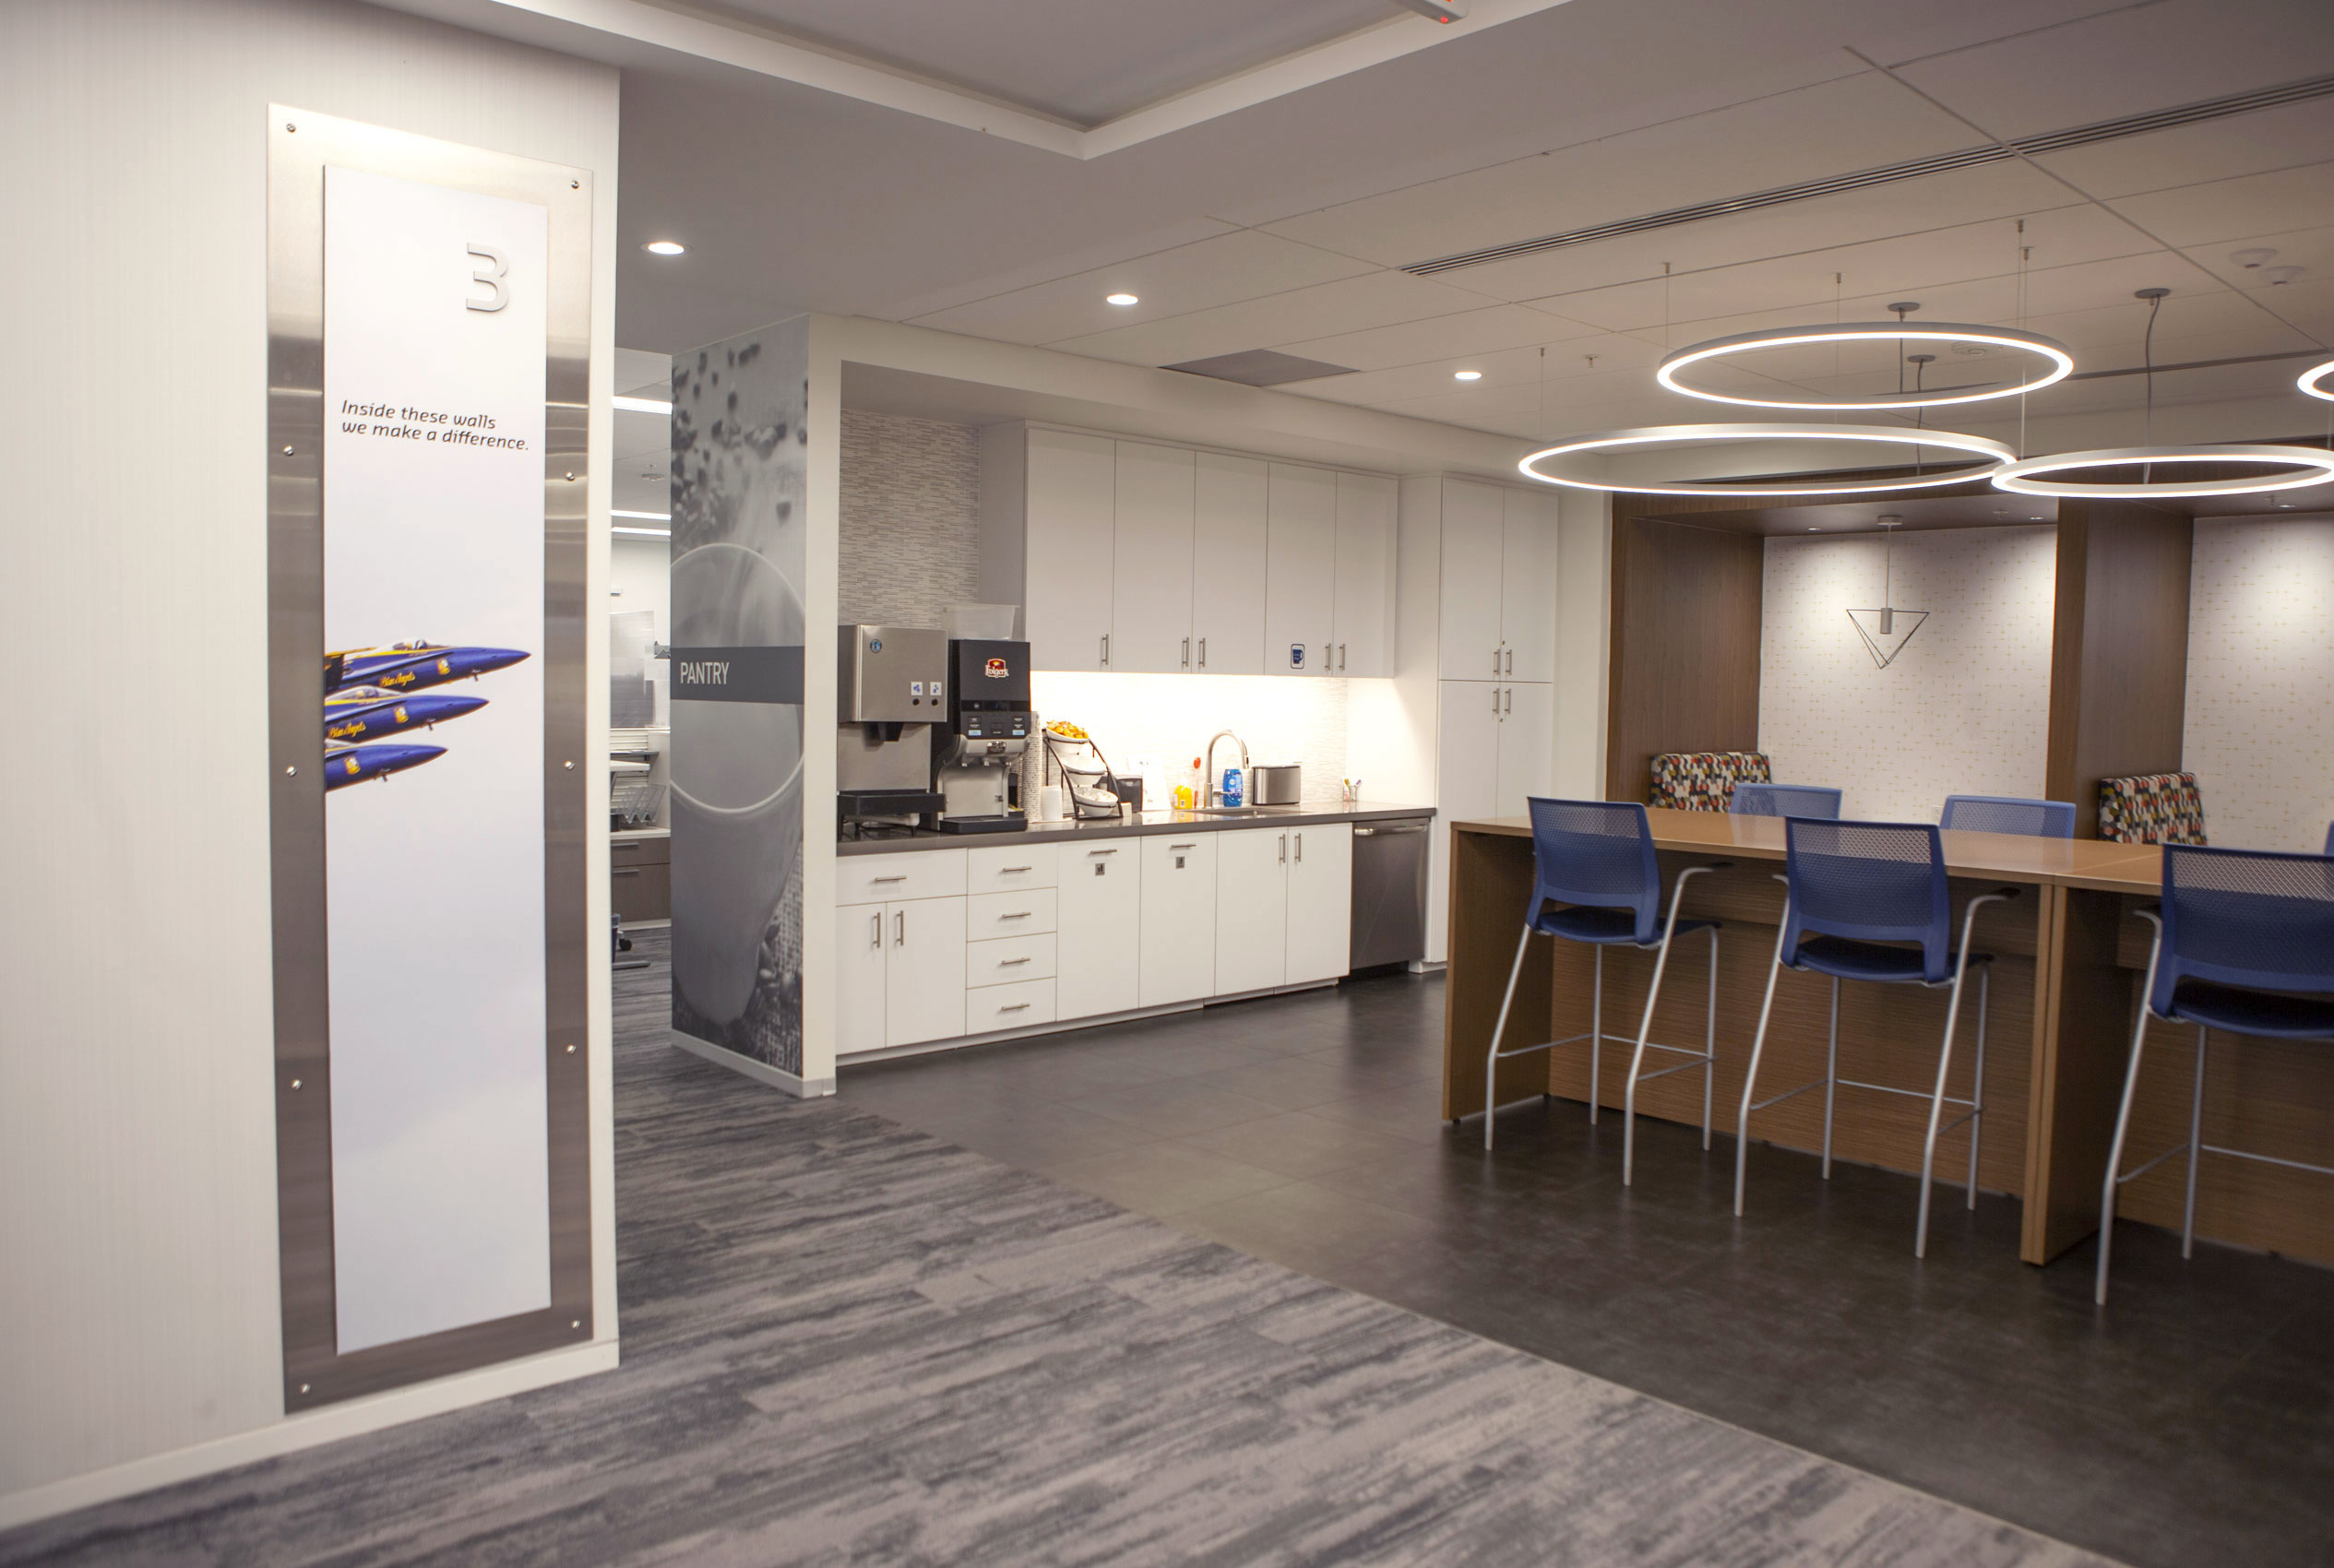 Elevator landing with large photo of Blue Angels airplanes and dining area